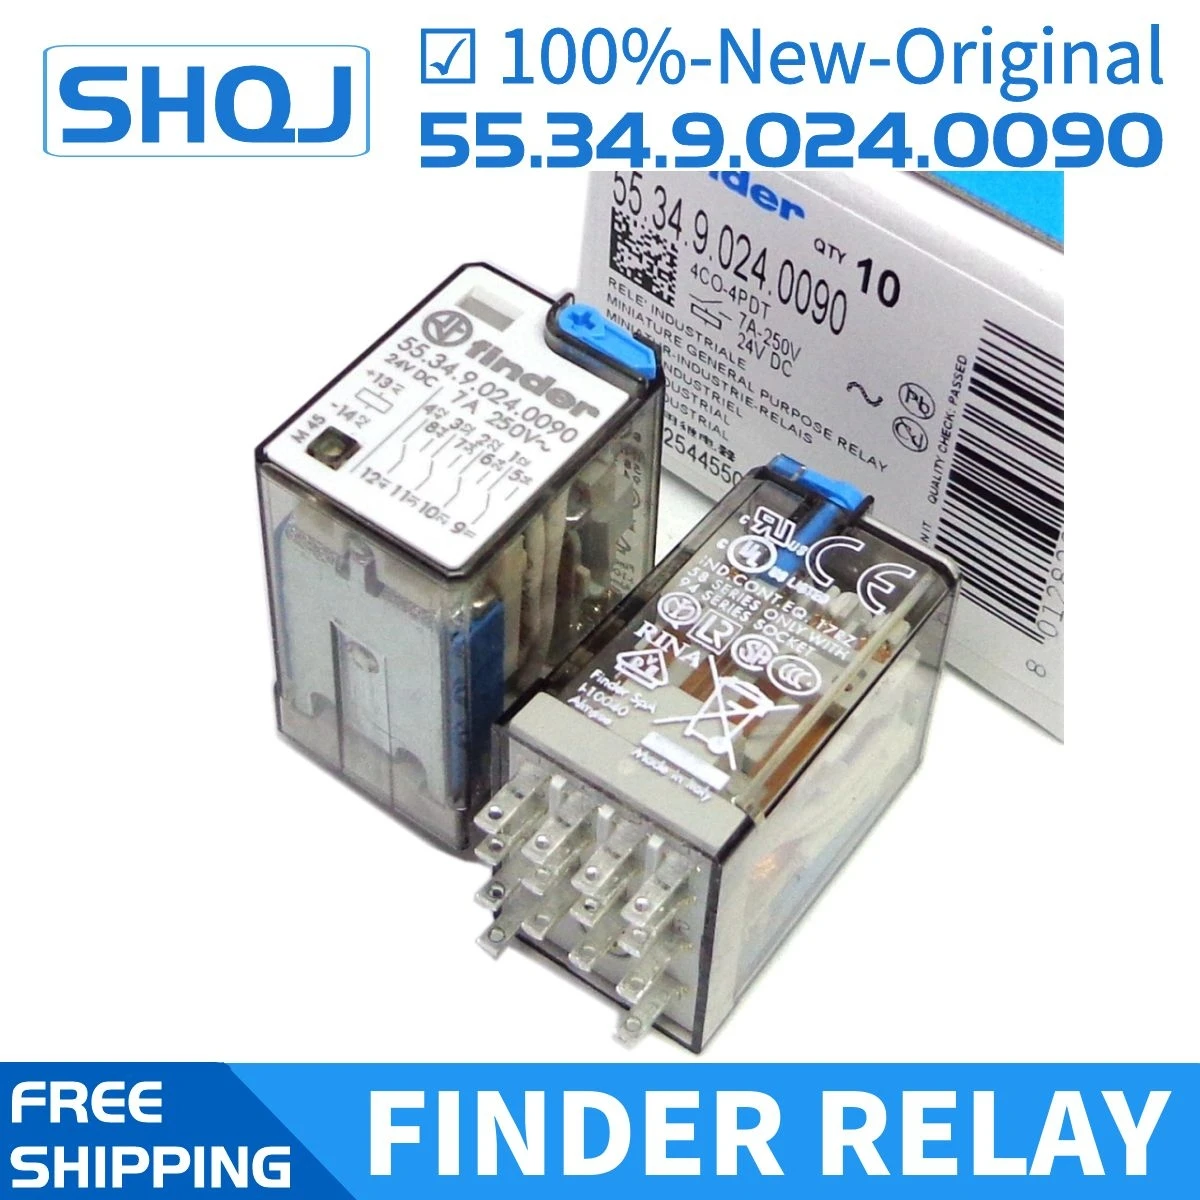 

finder relay 55.34.9.024.0090 24VDC+LED 4CO 14PIN 7A 100%-new-original